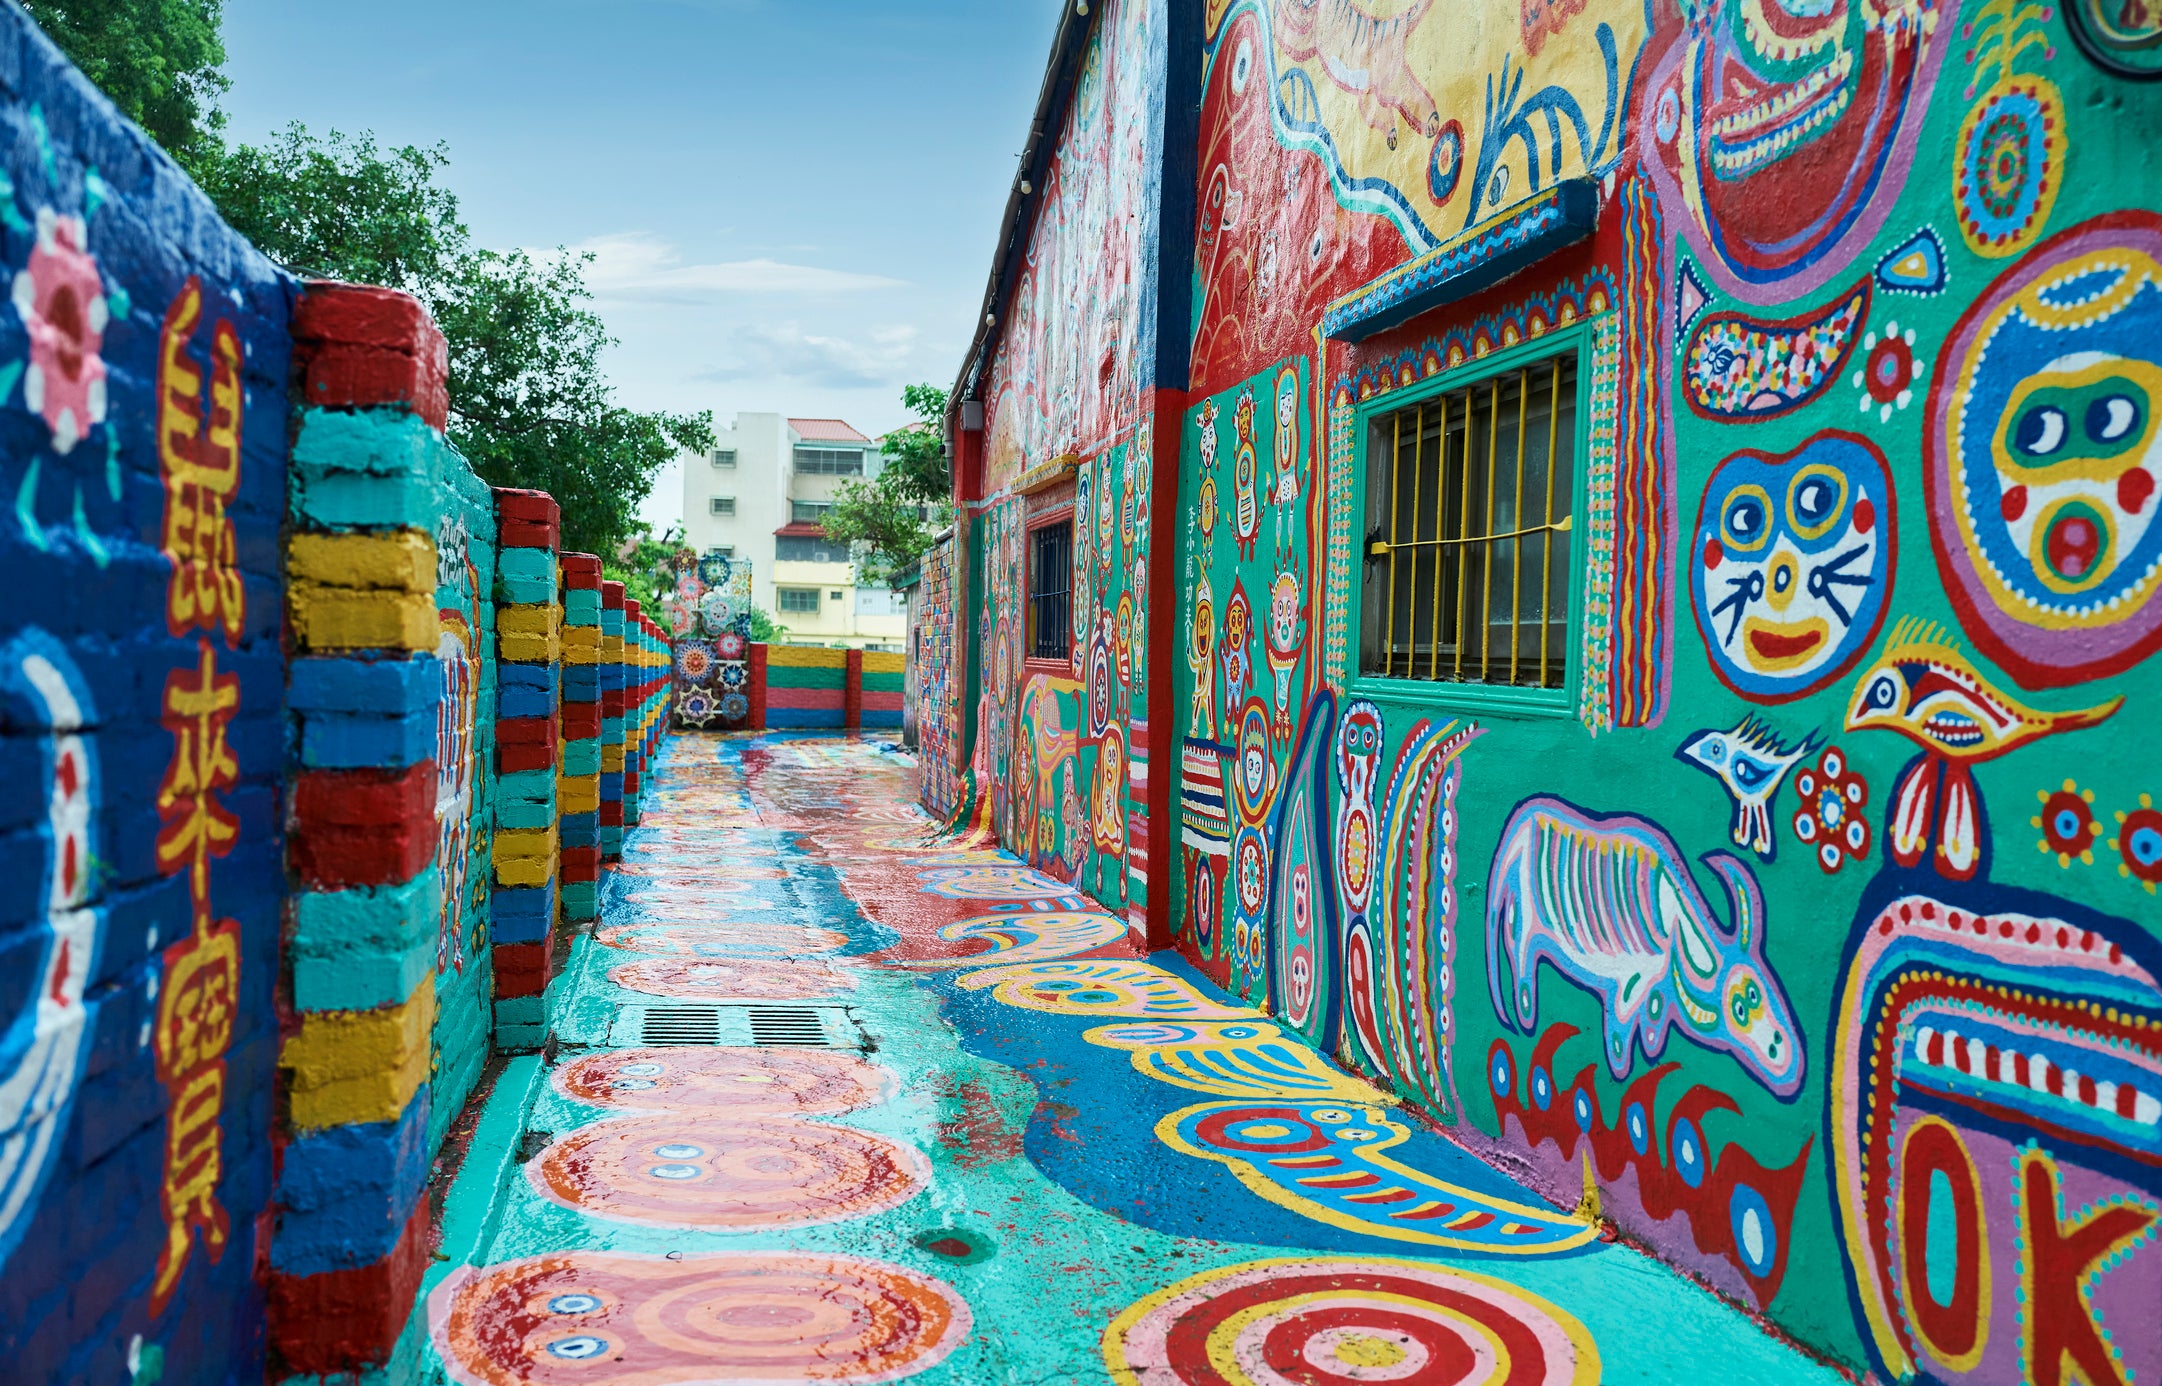 The colourful chinese graffiti painted on the wall at Rainbow Village